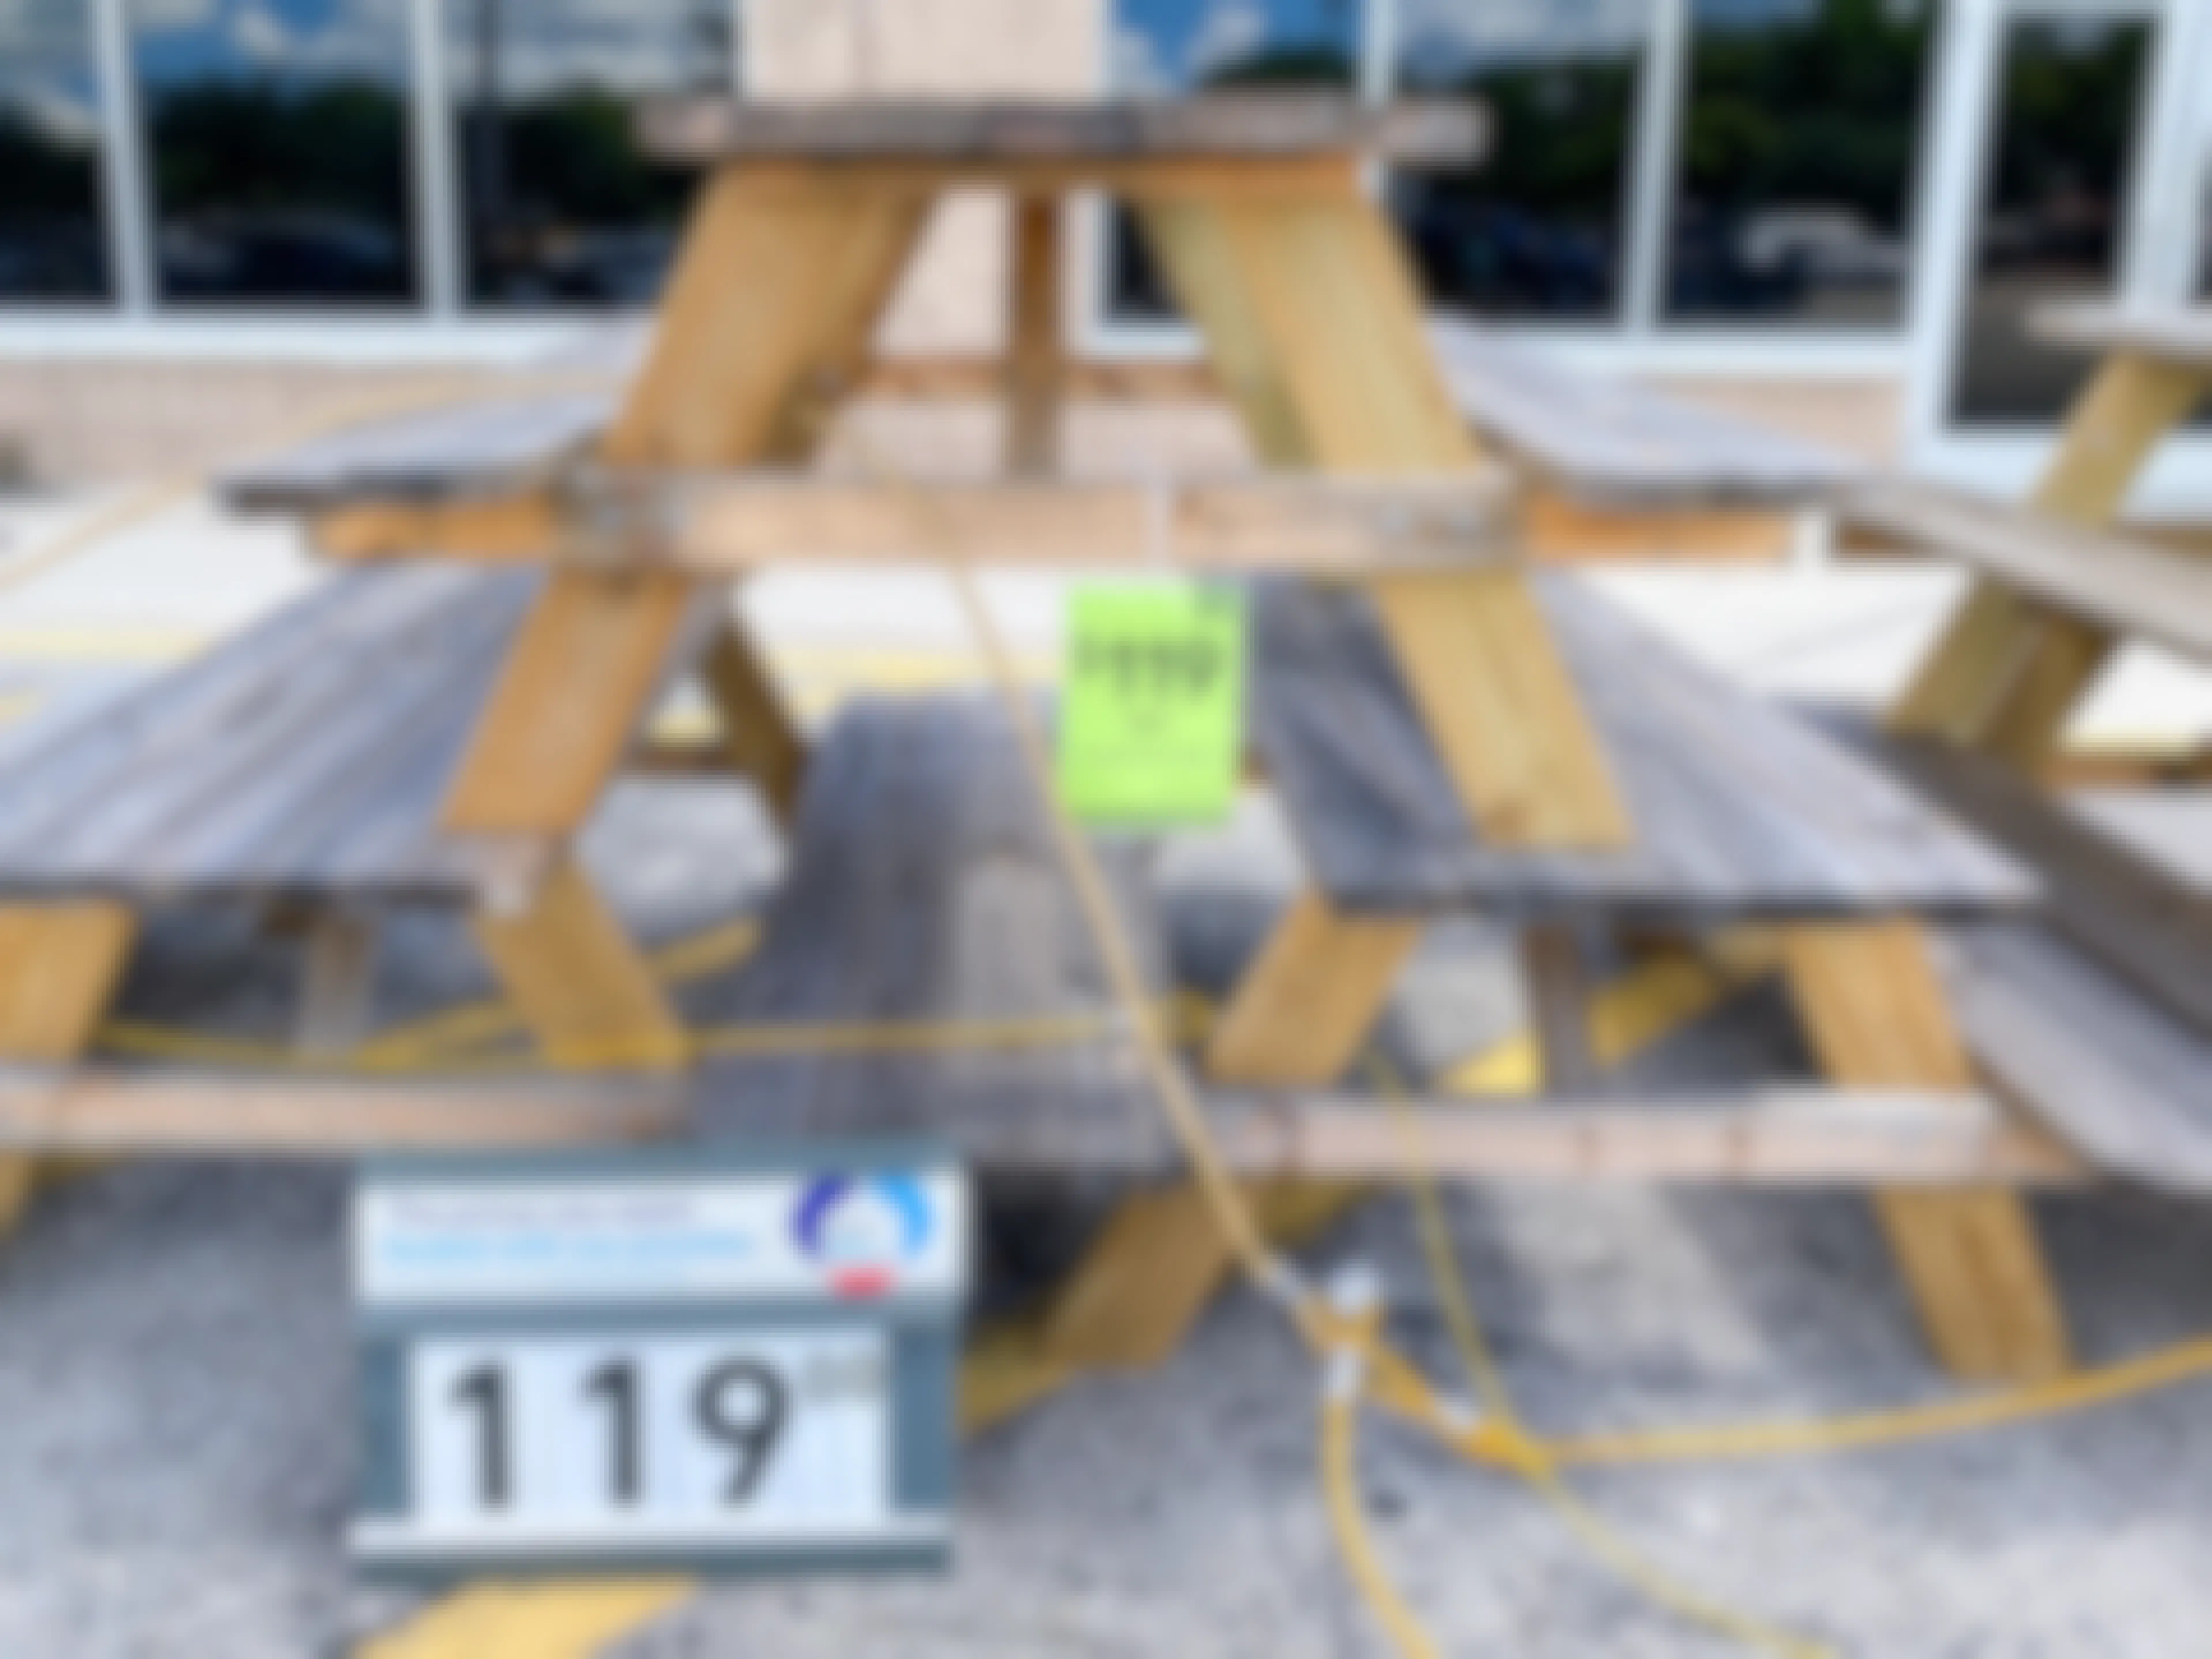 wooden patio table on sale outside at Lowe's